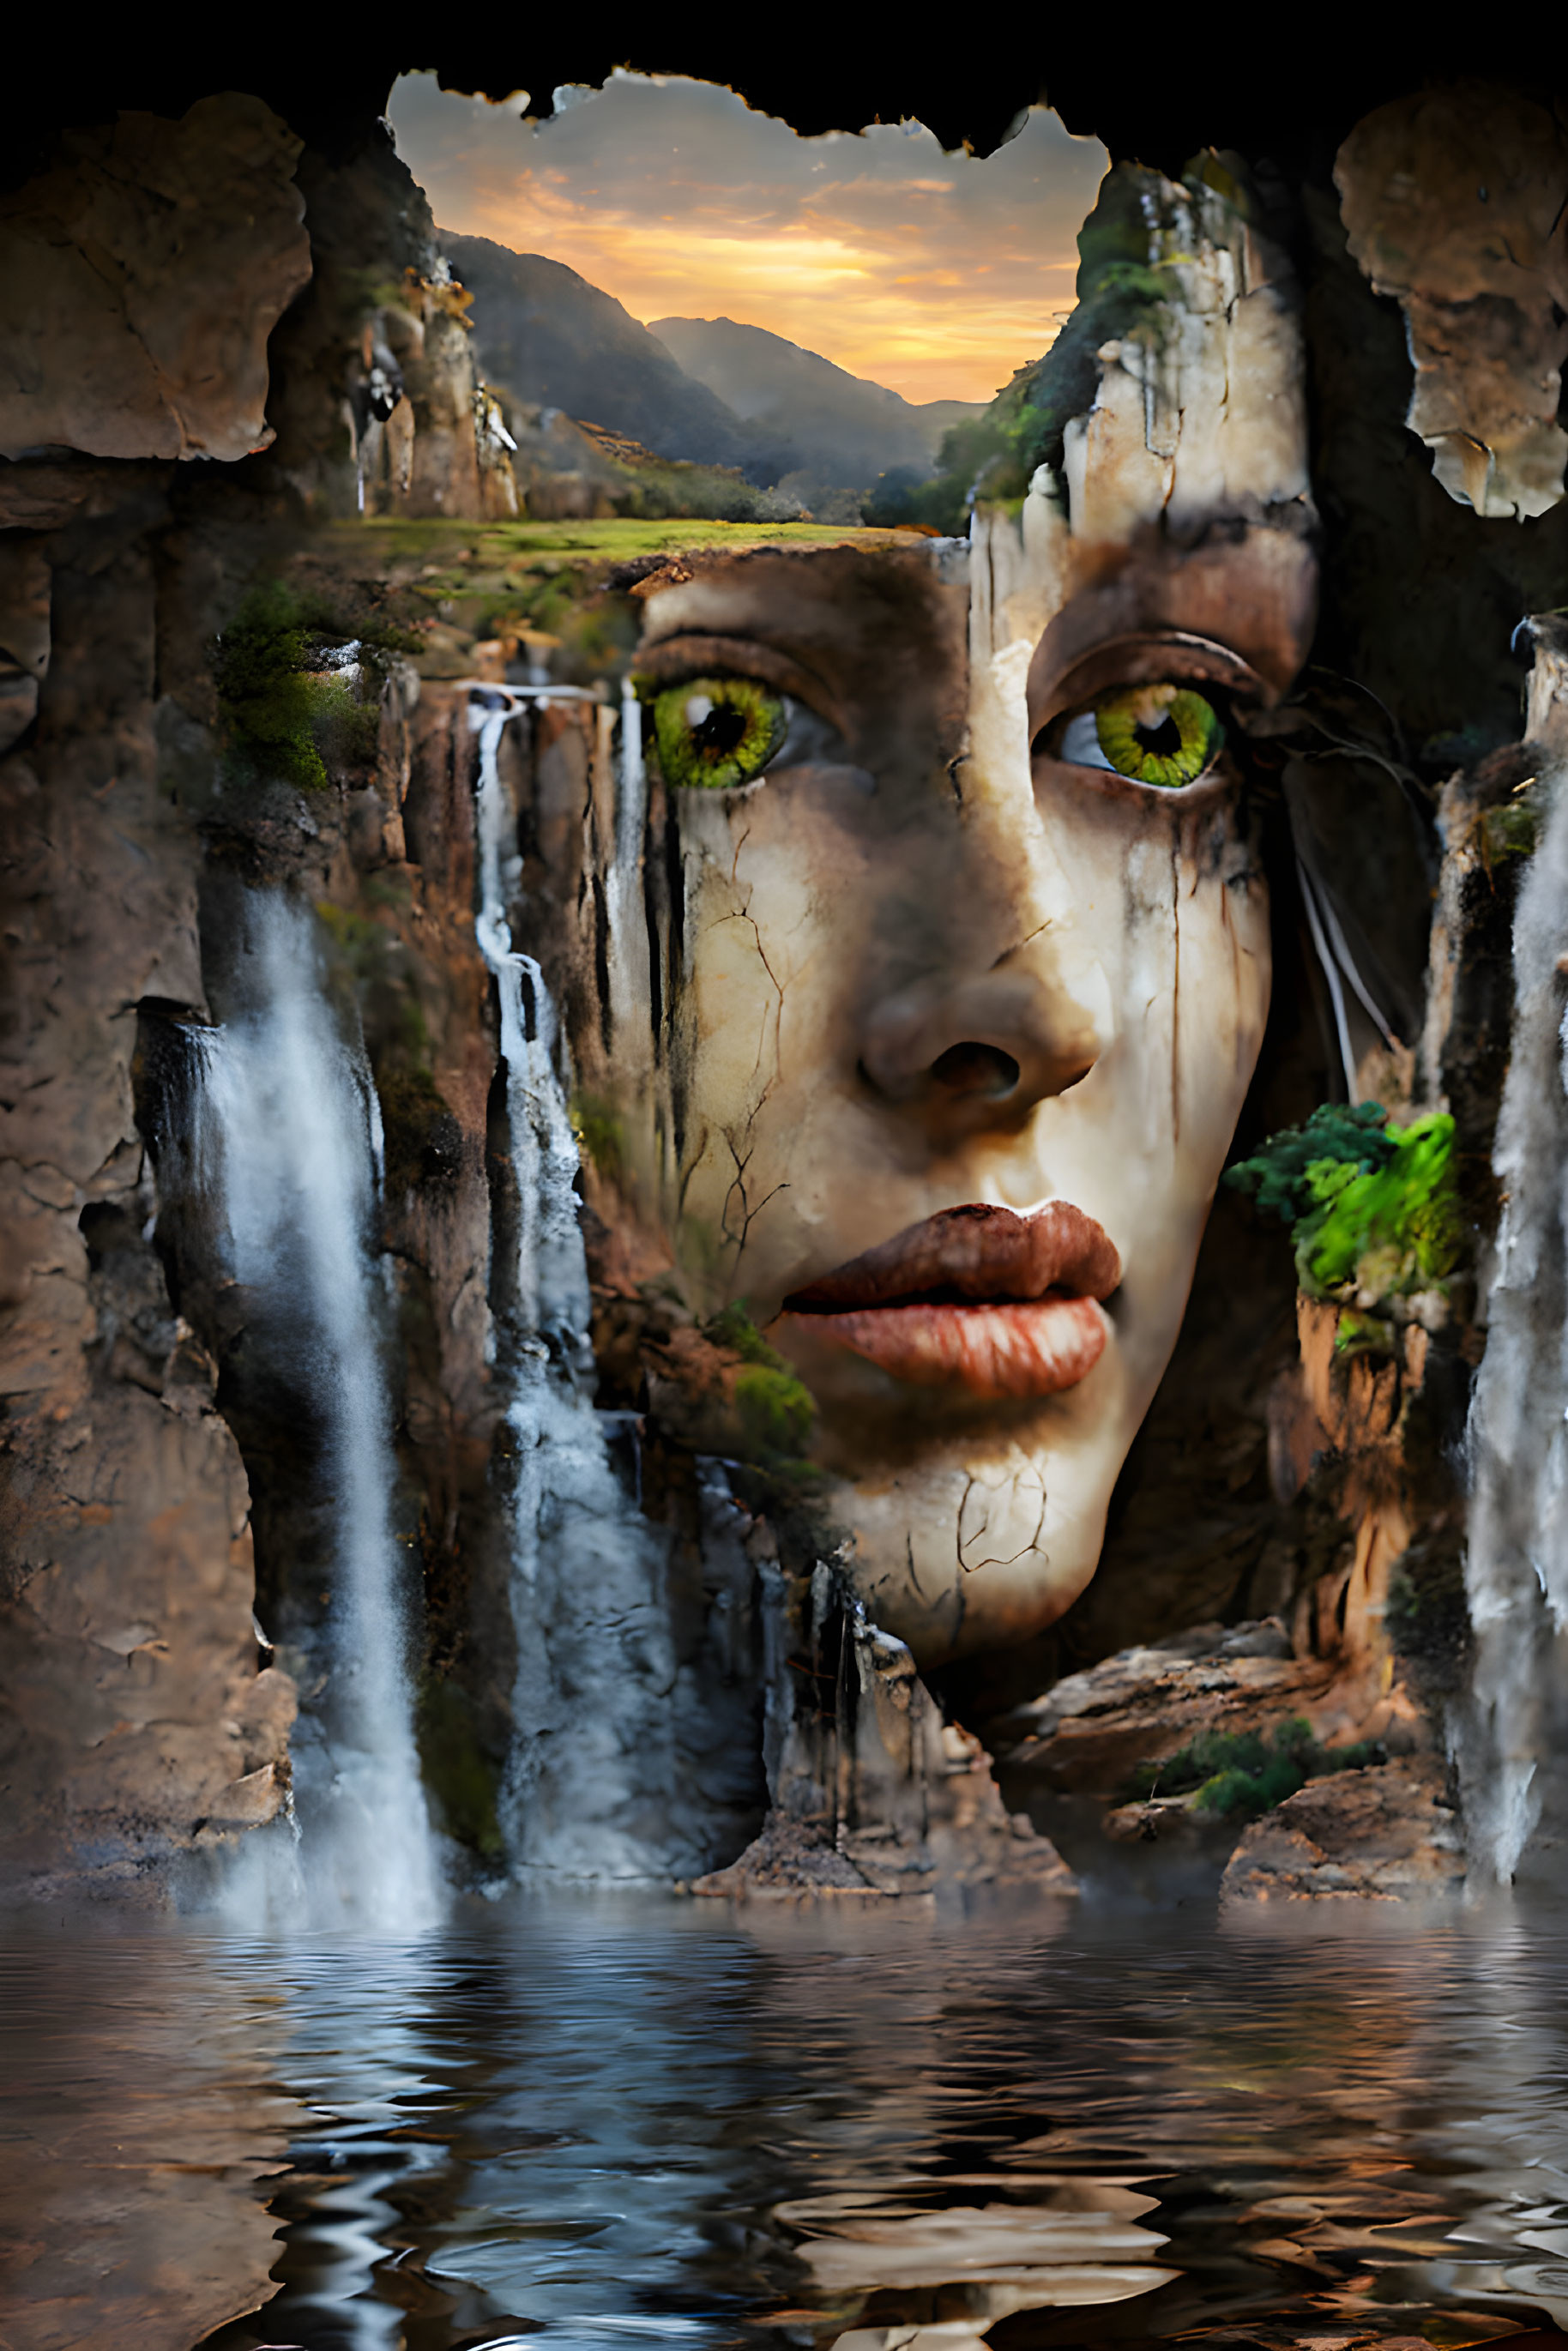 Surreal image merges woman's face with waterfall landscape